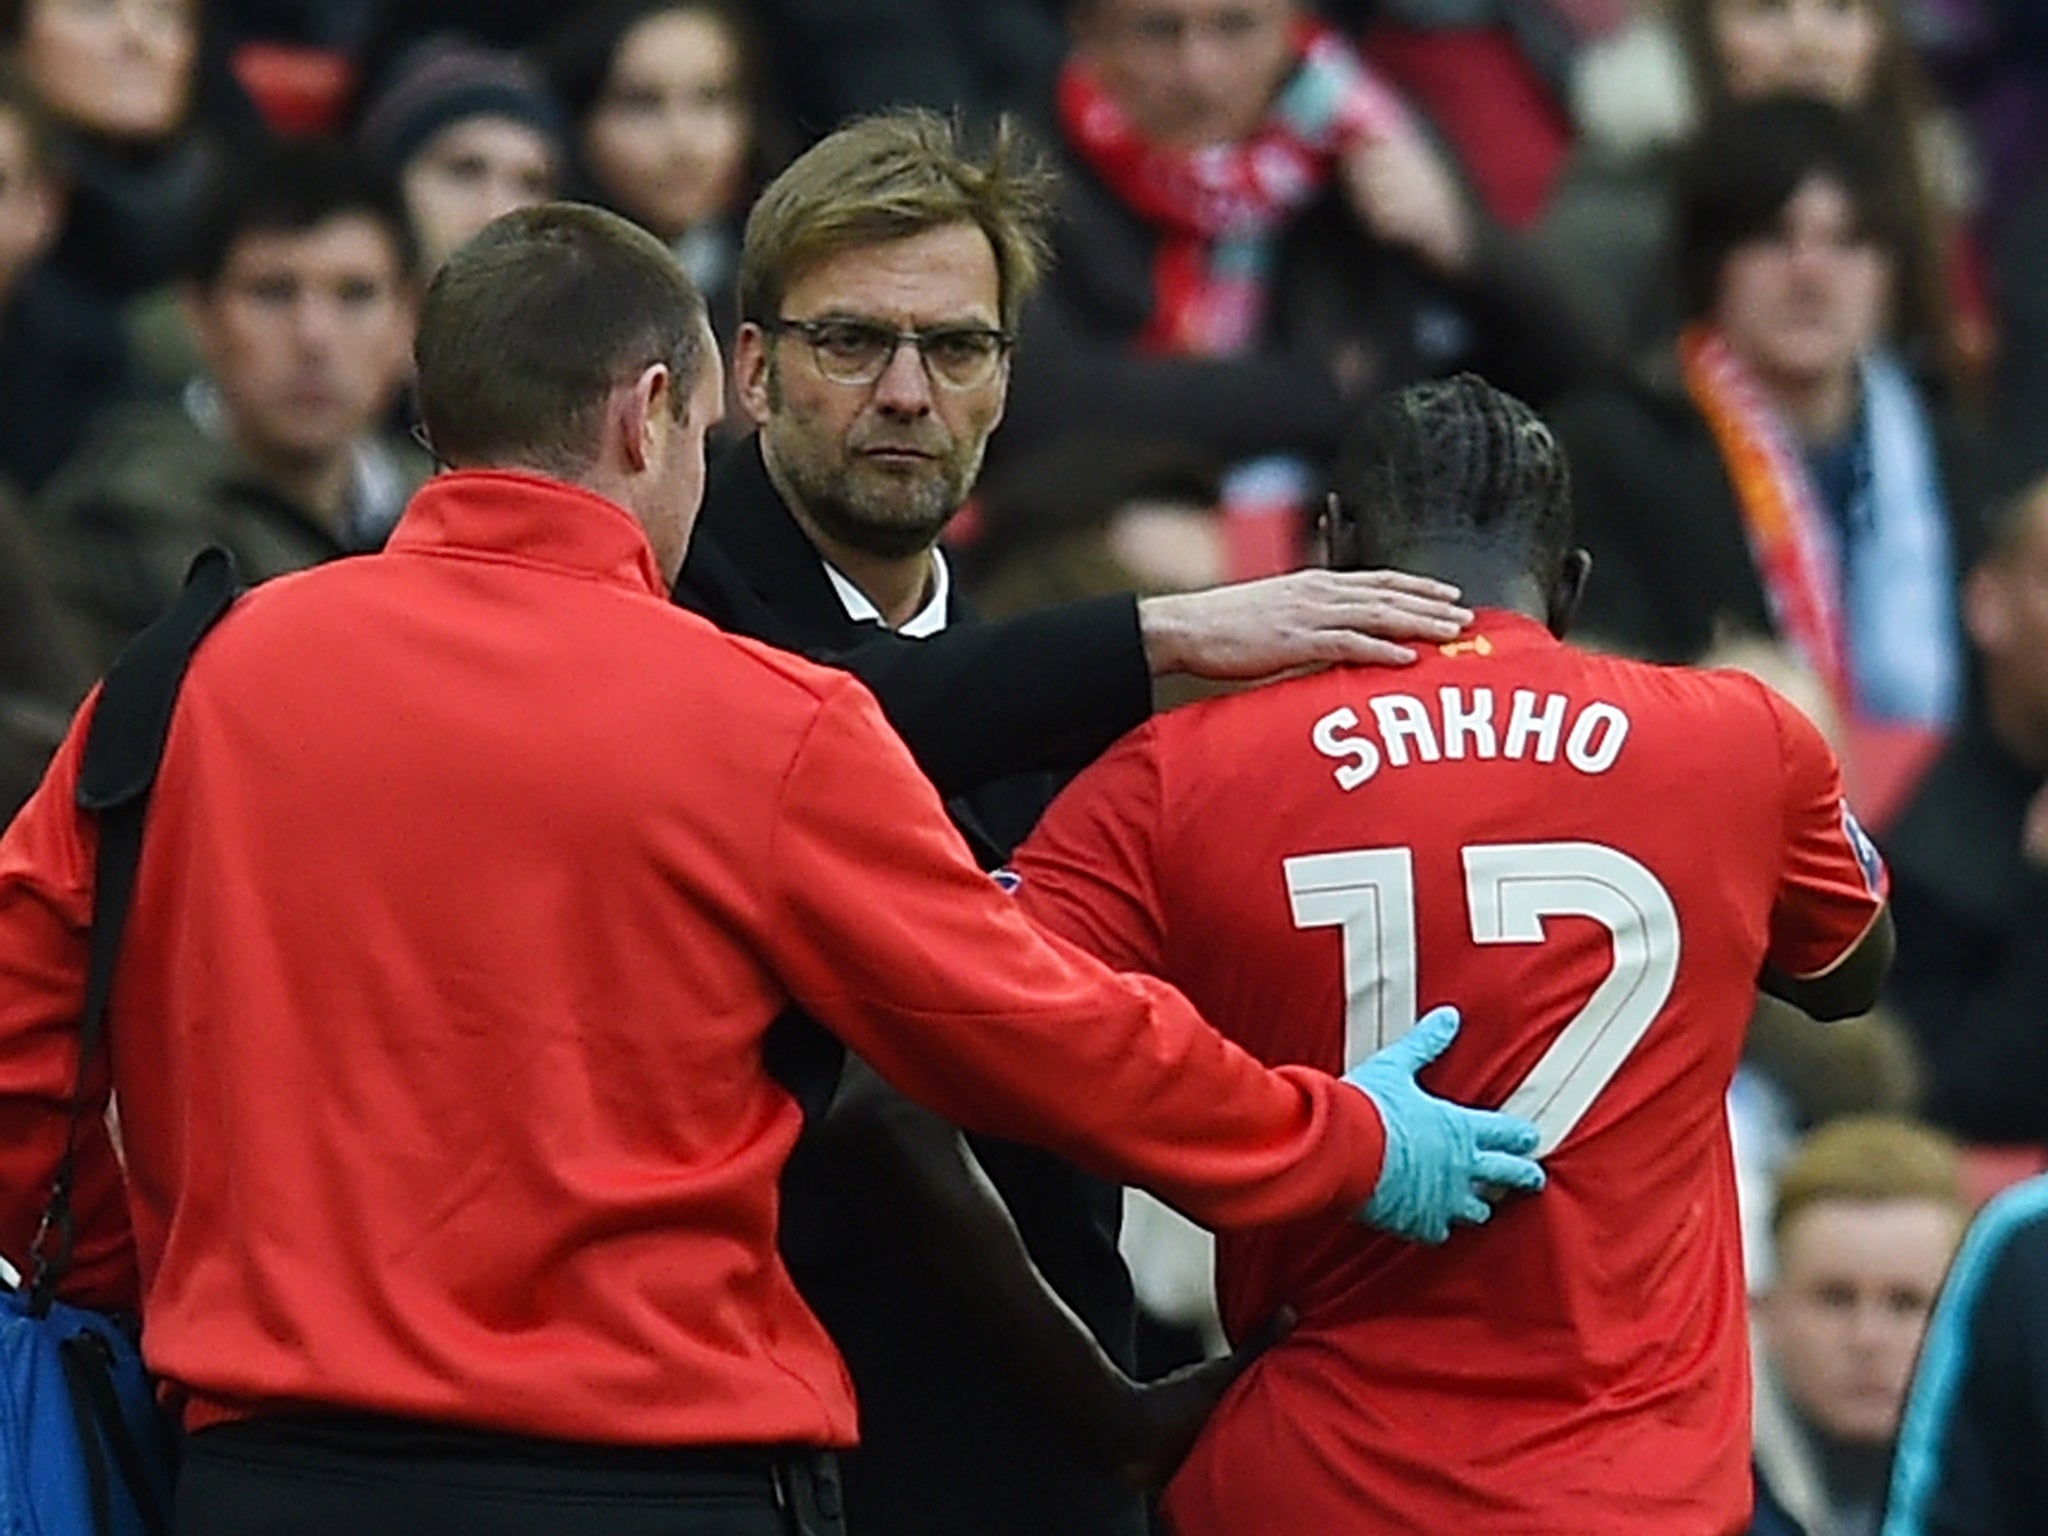 Liverpool defender Mamadou Sakho leaves the field at Wembley